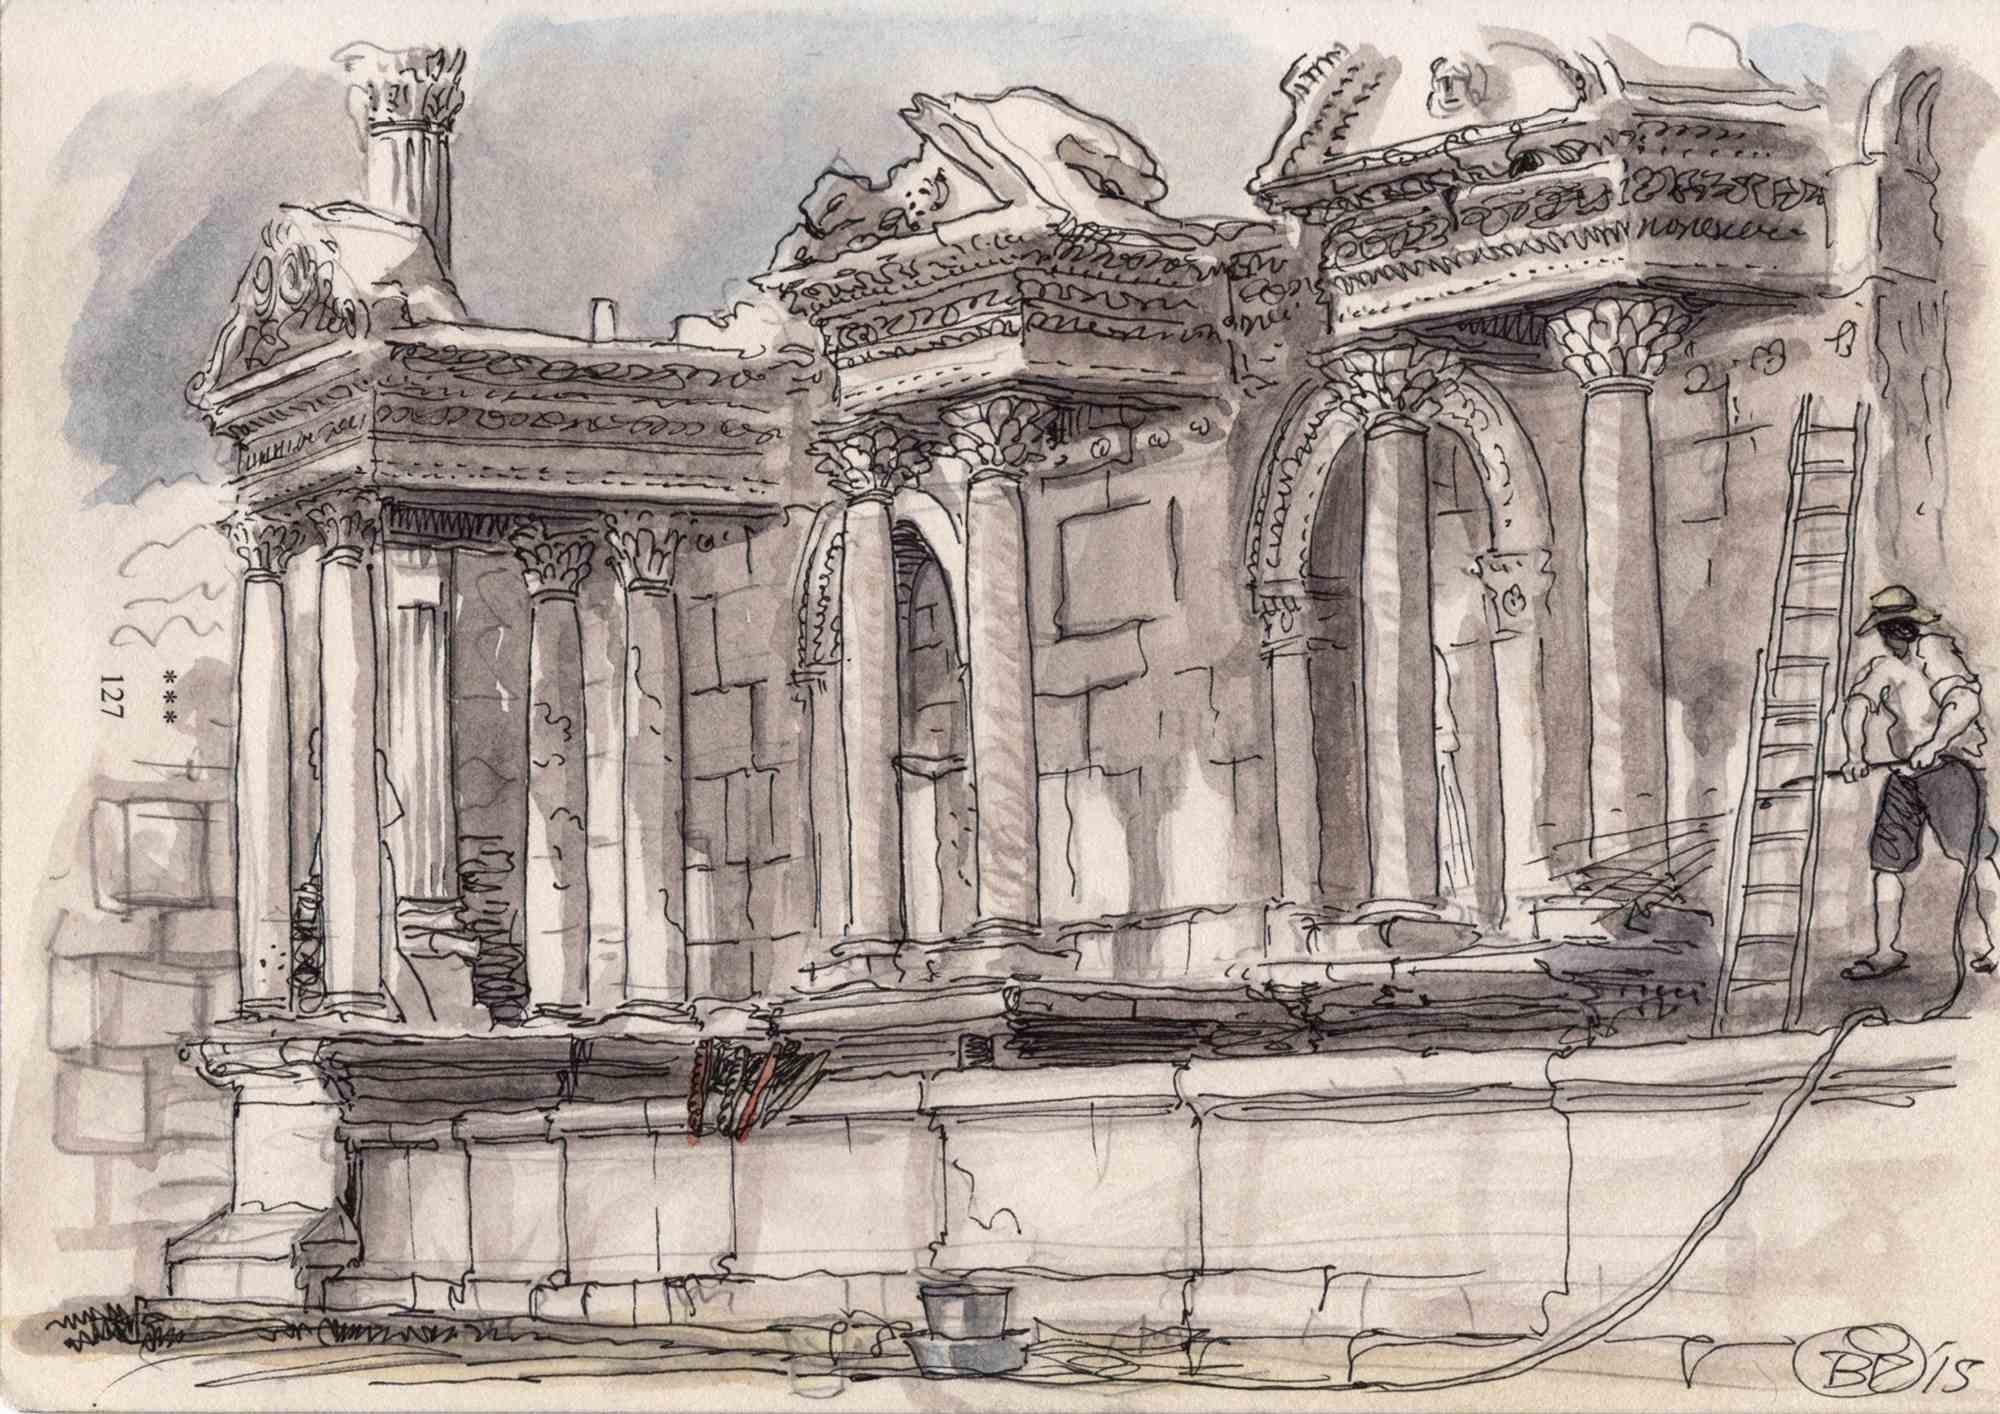 This work entitled "Sagalassos Funtain" was made by Vincenzo Bizzarri in 2016 with ink and watercolor on rough notebook paper 200gr (21x14,8cm). It is part of a series of illustrations made "en plein air" during a visit to the archaeological site of